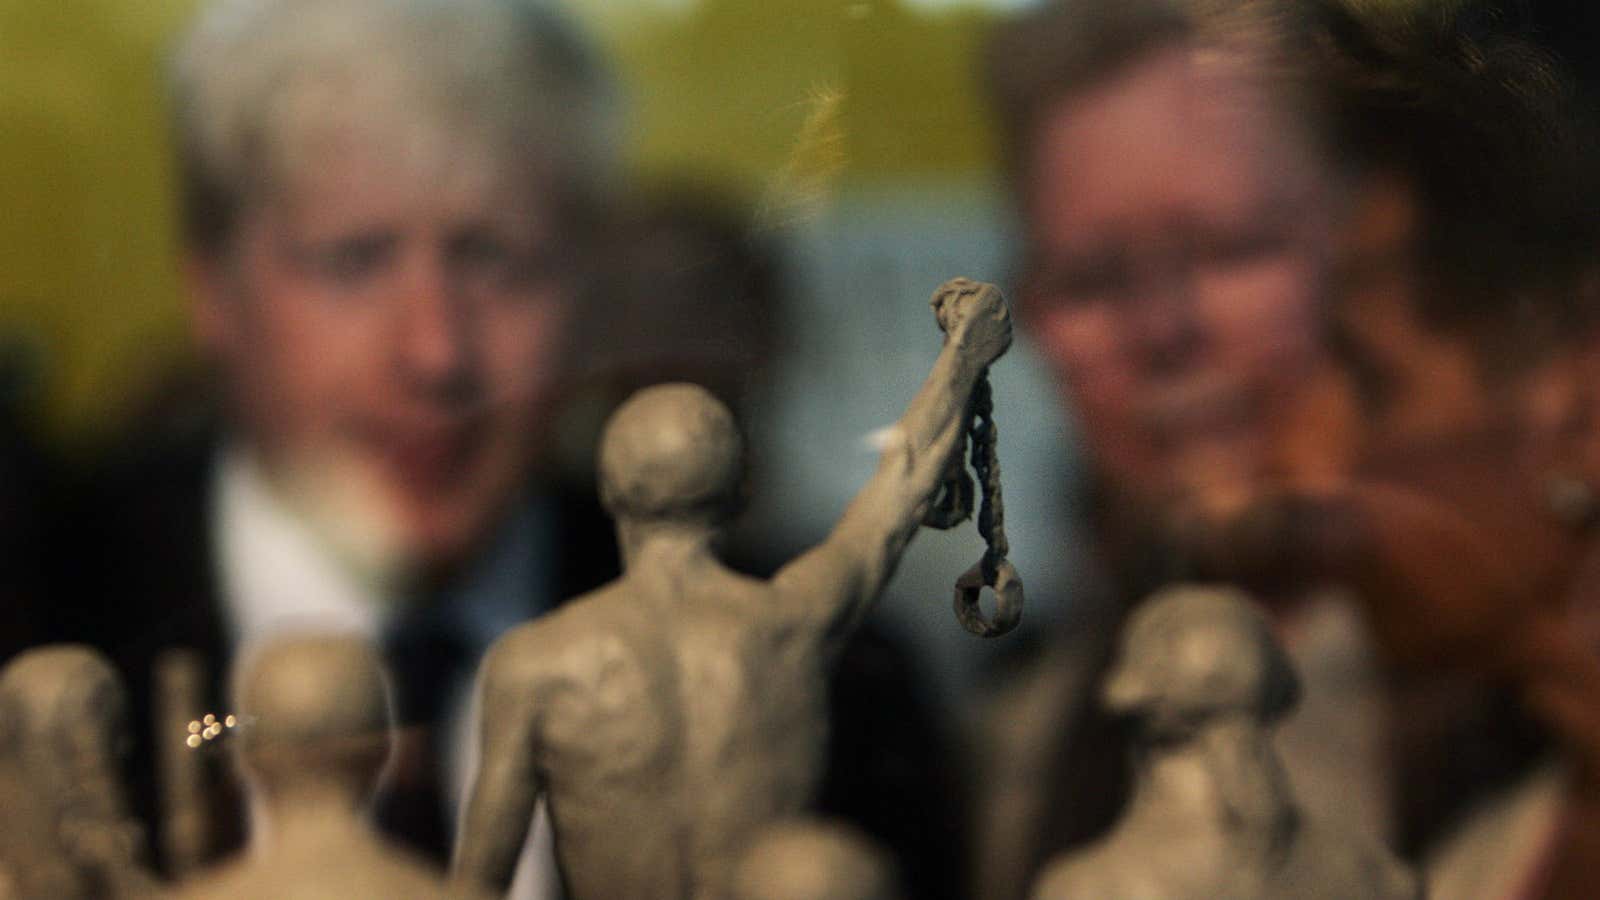 Mayor of London Boris Johnson, left, looks at a model of a statue to be built as a permanent slavery memorial at City Hall in London.